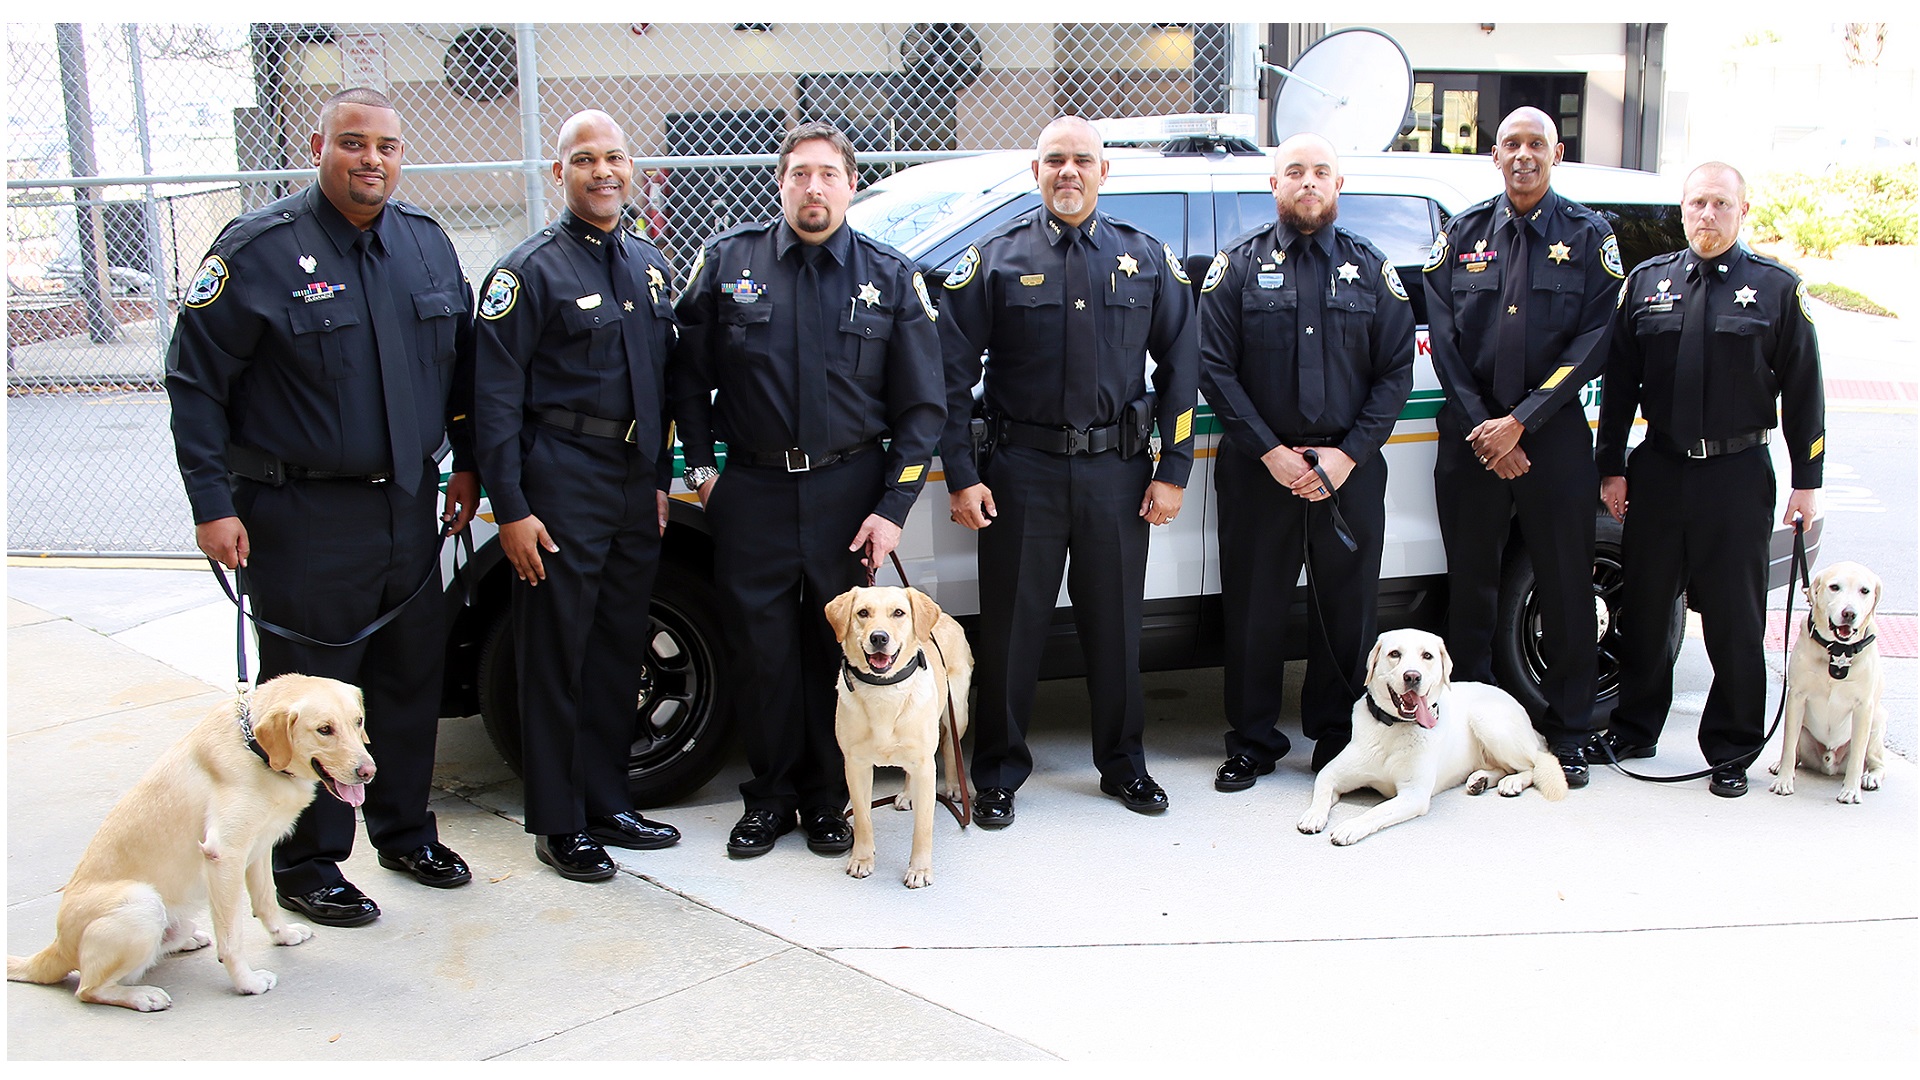 Image of Chief, DC's, and K9's